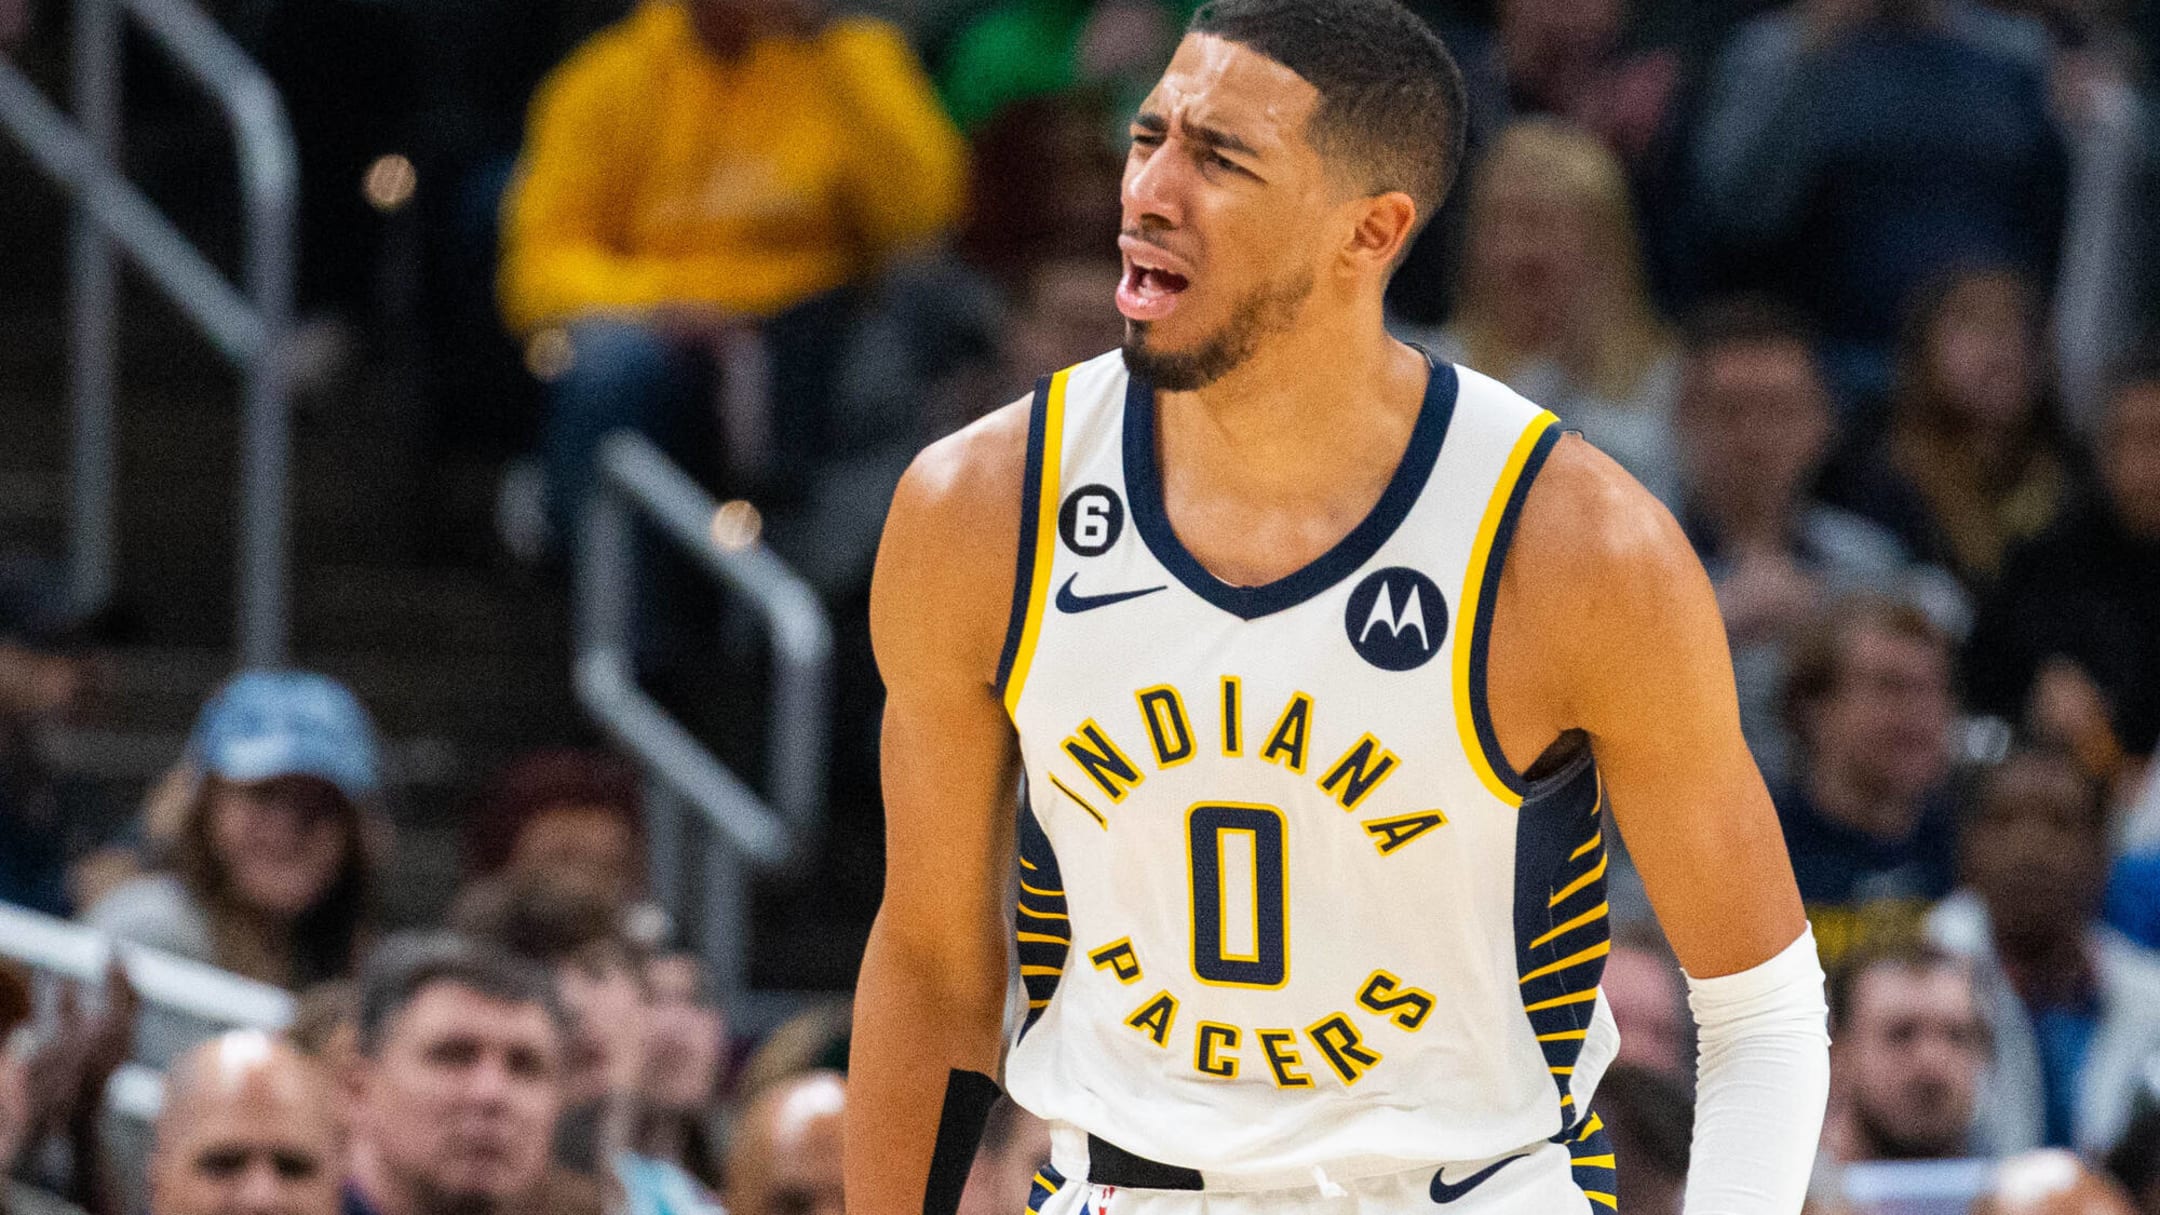 Tyrese Haliburton becomes youngest player in Pacers franchise